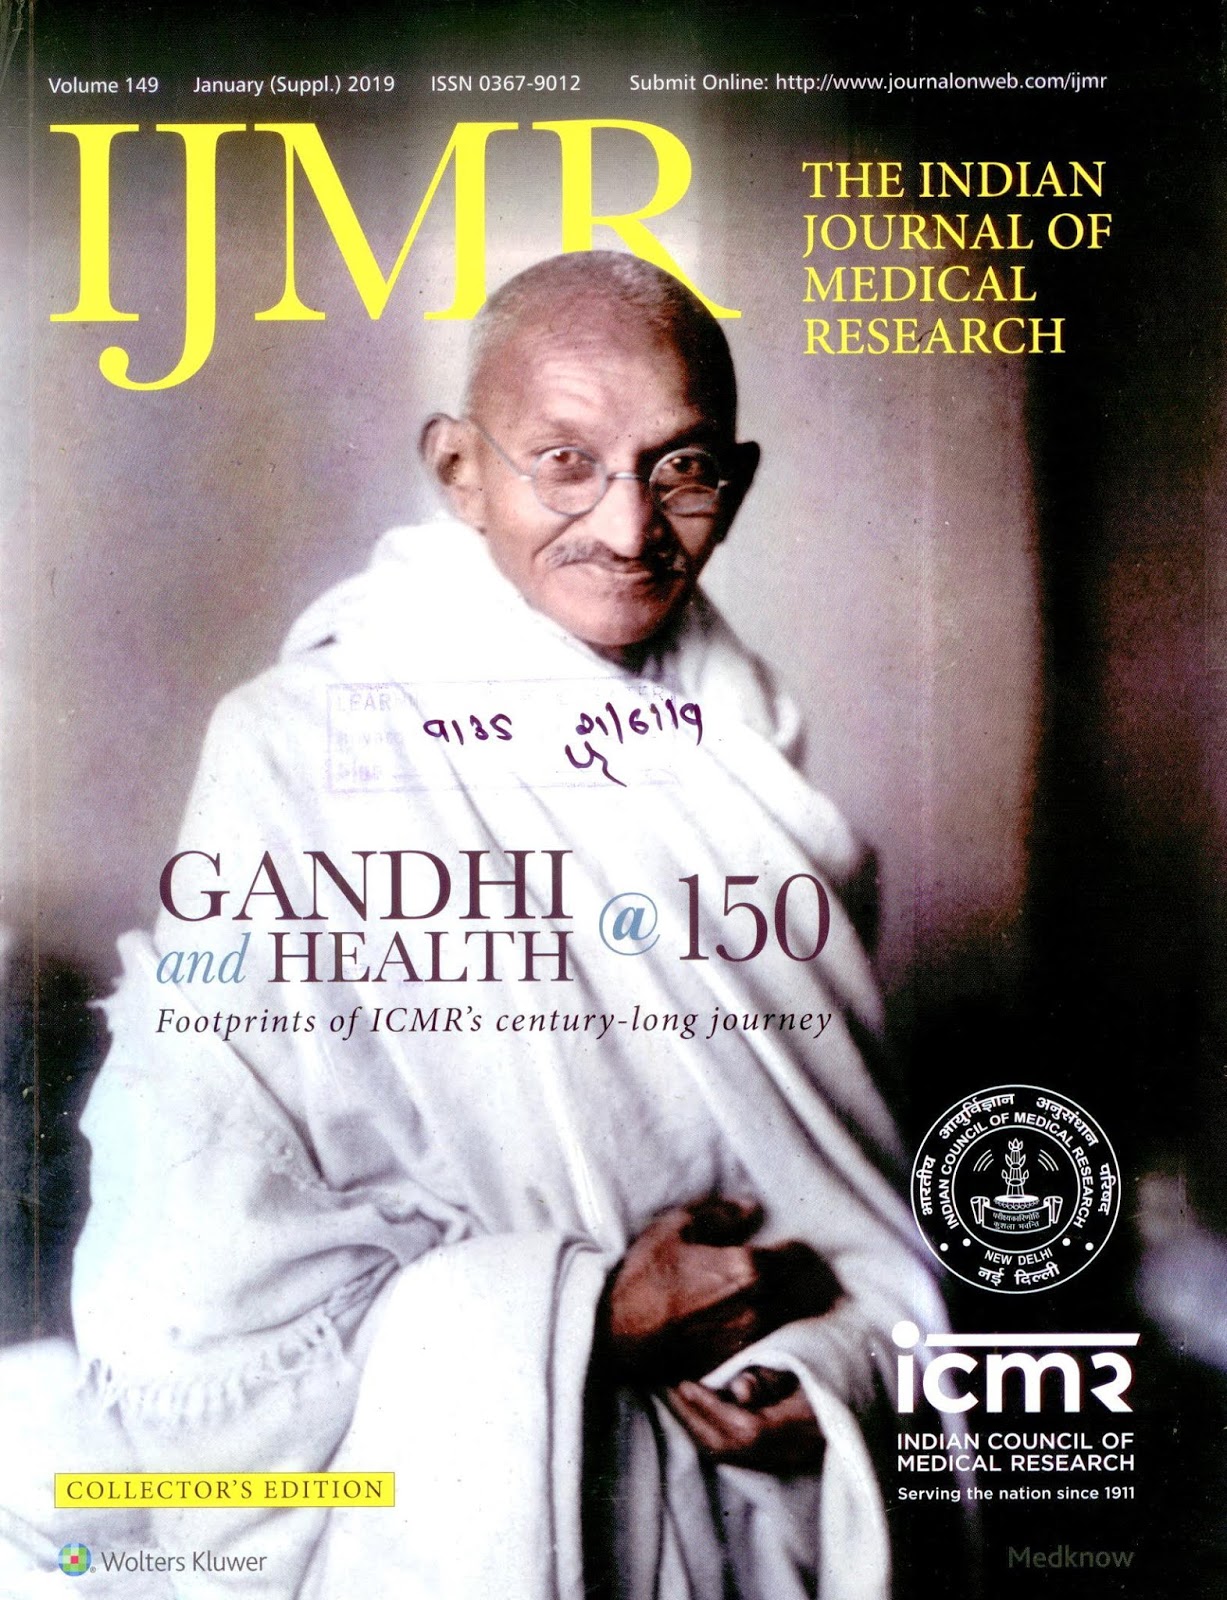 http://www.ijmr.org.in/showBackIssue.asp?issn=0971-5916;year=2019;volume=149;issue=7;month=January;supp=Y